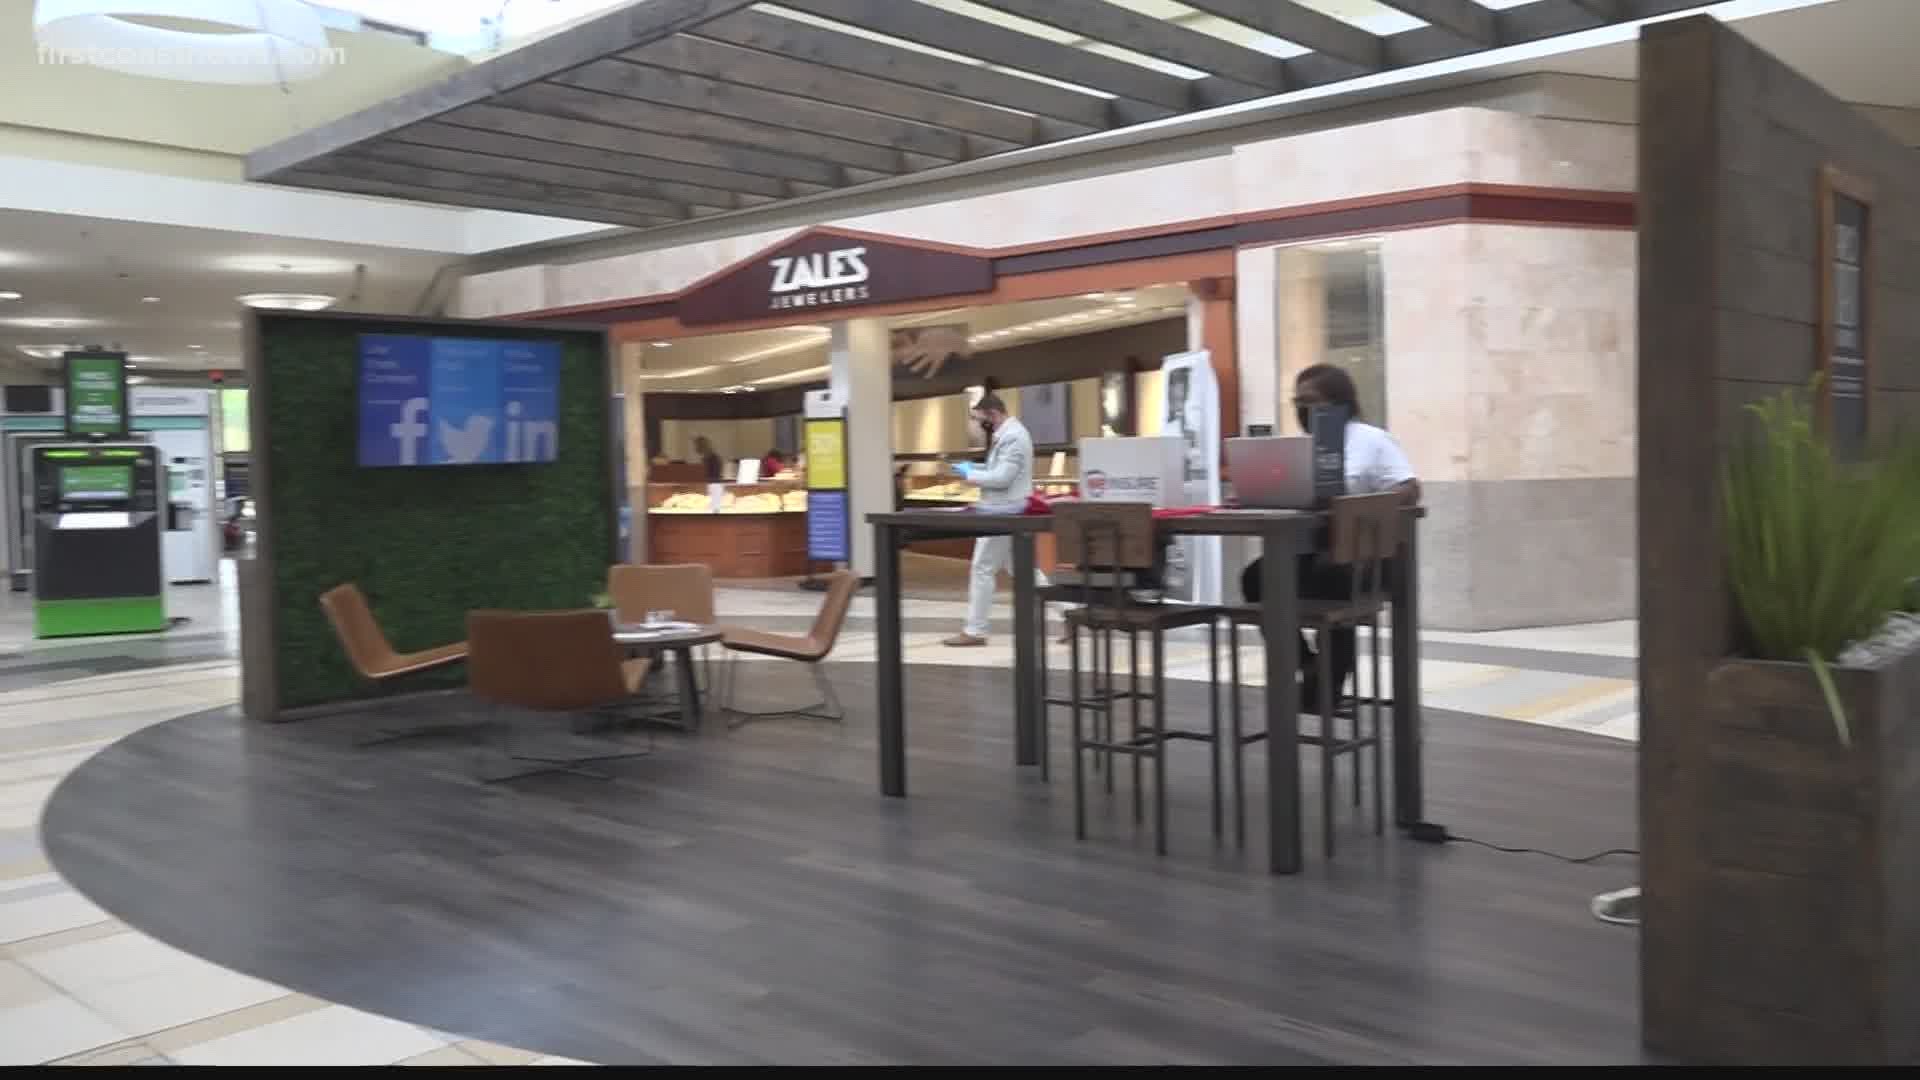 Malls across America are evolving away from big-box department stores, adding office space and entertainment.